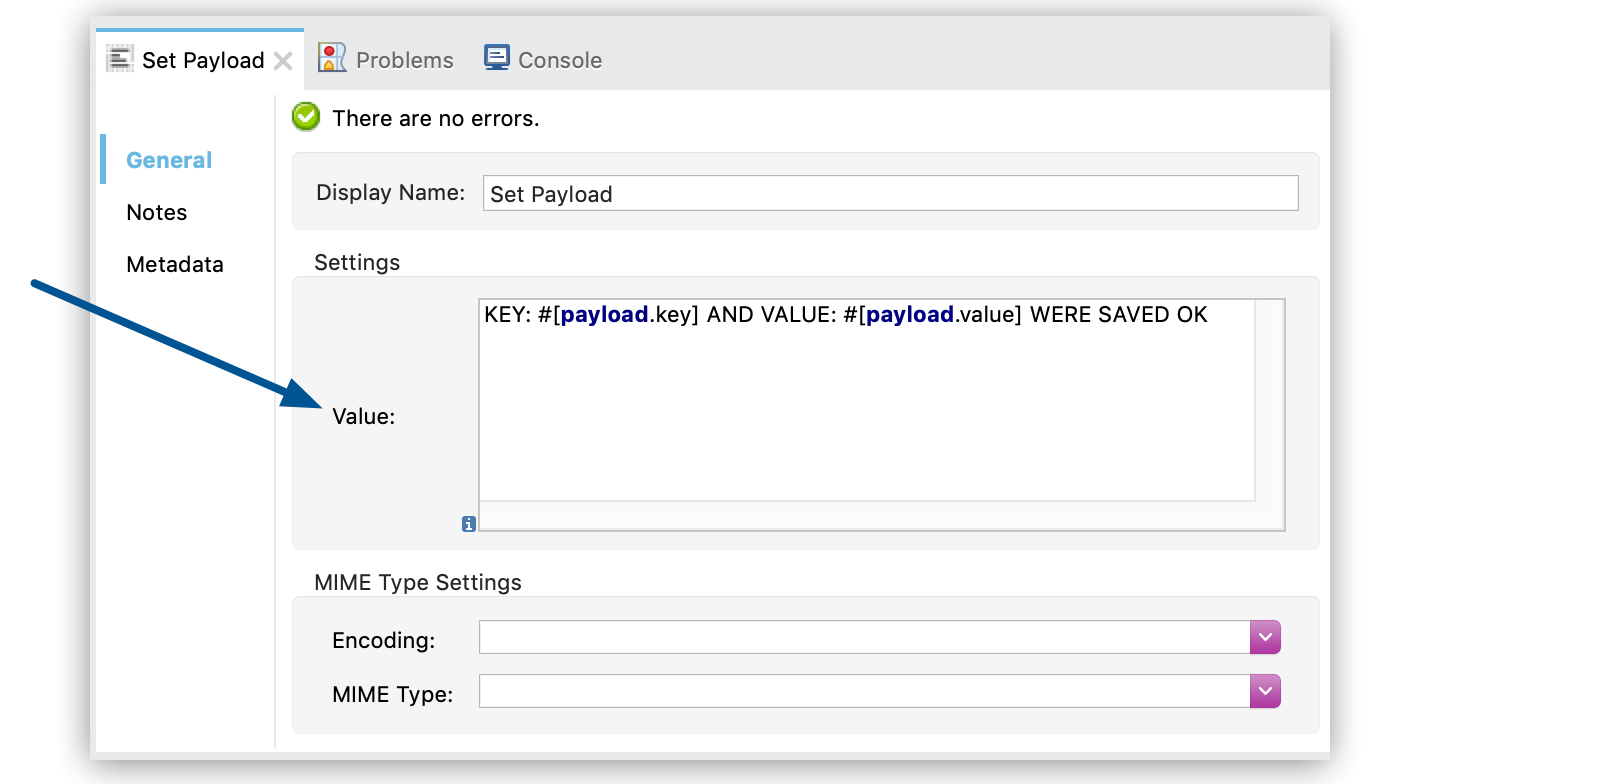 Value field in the Set Payload properties window